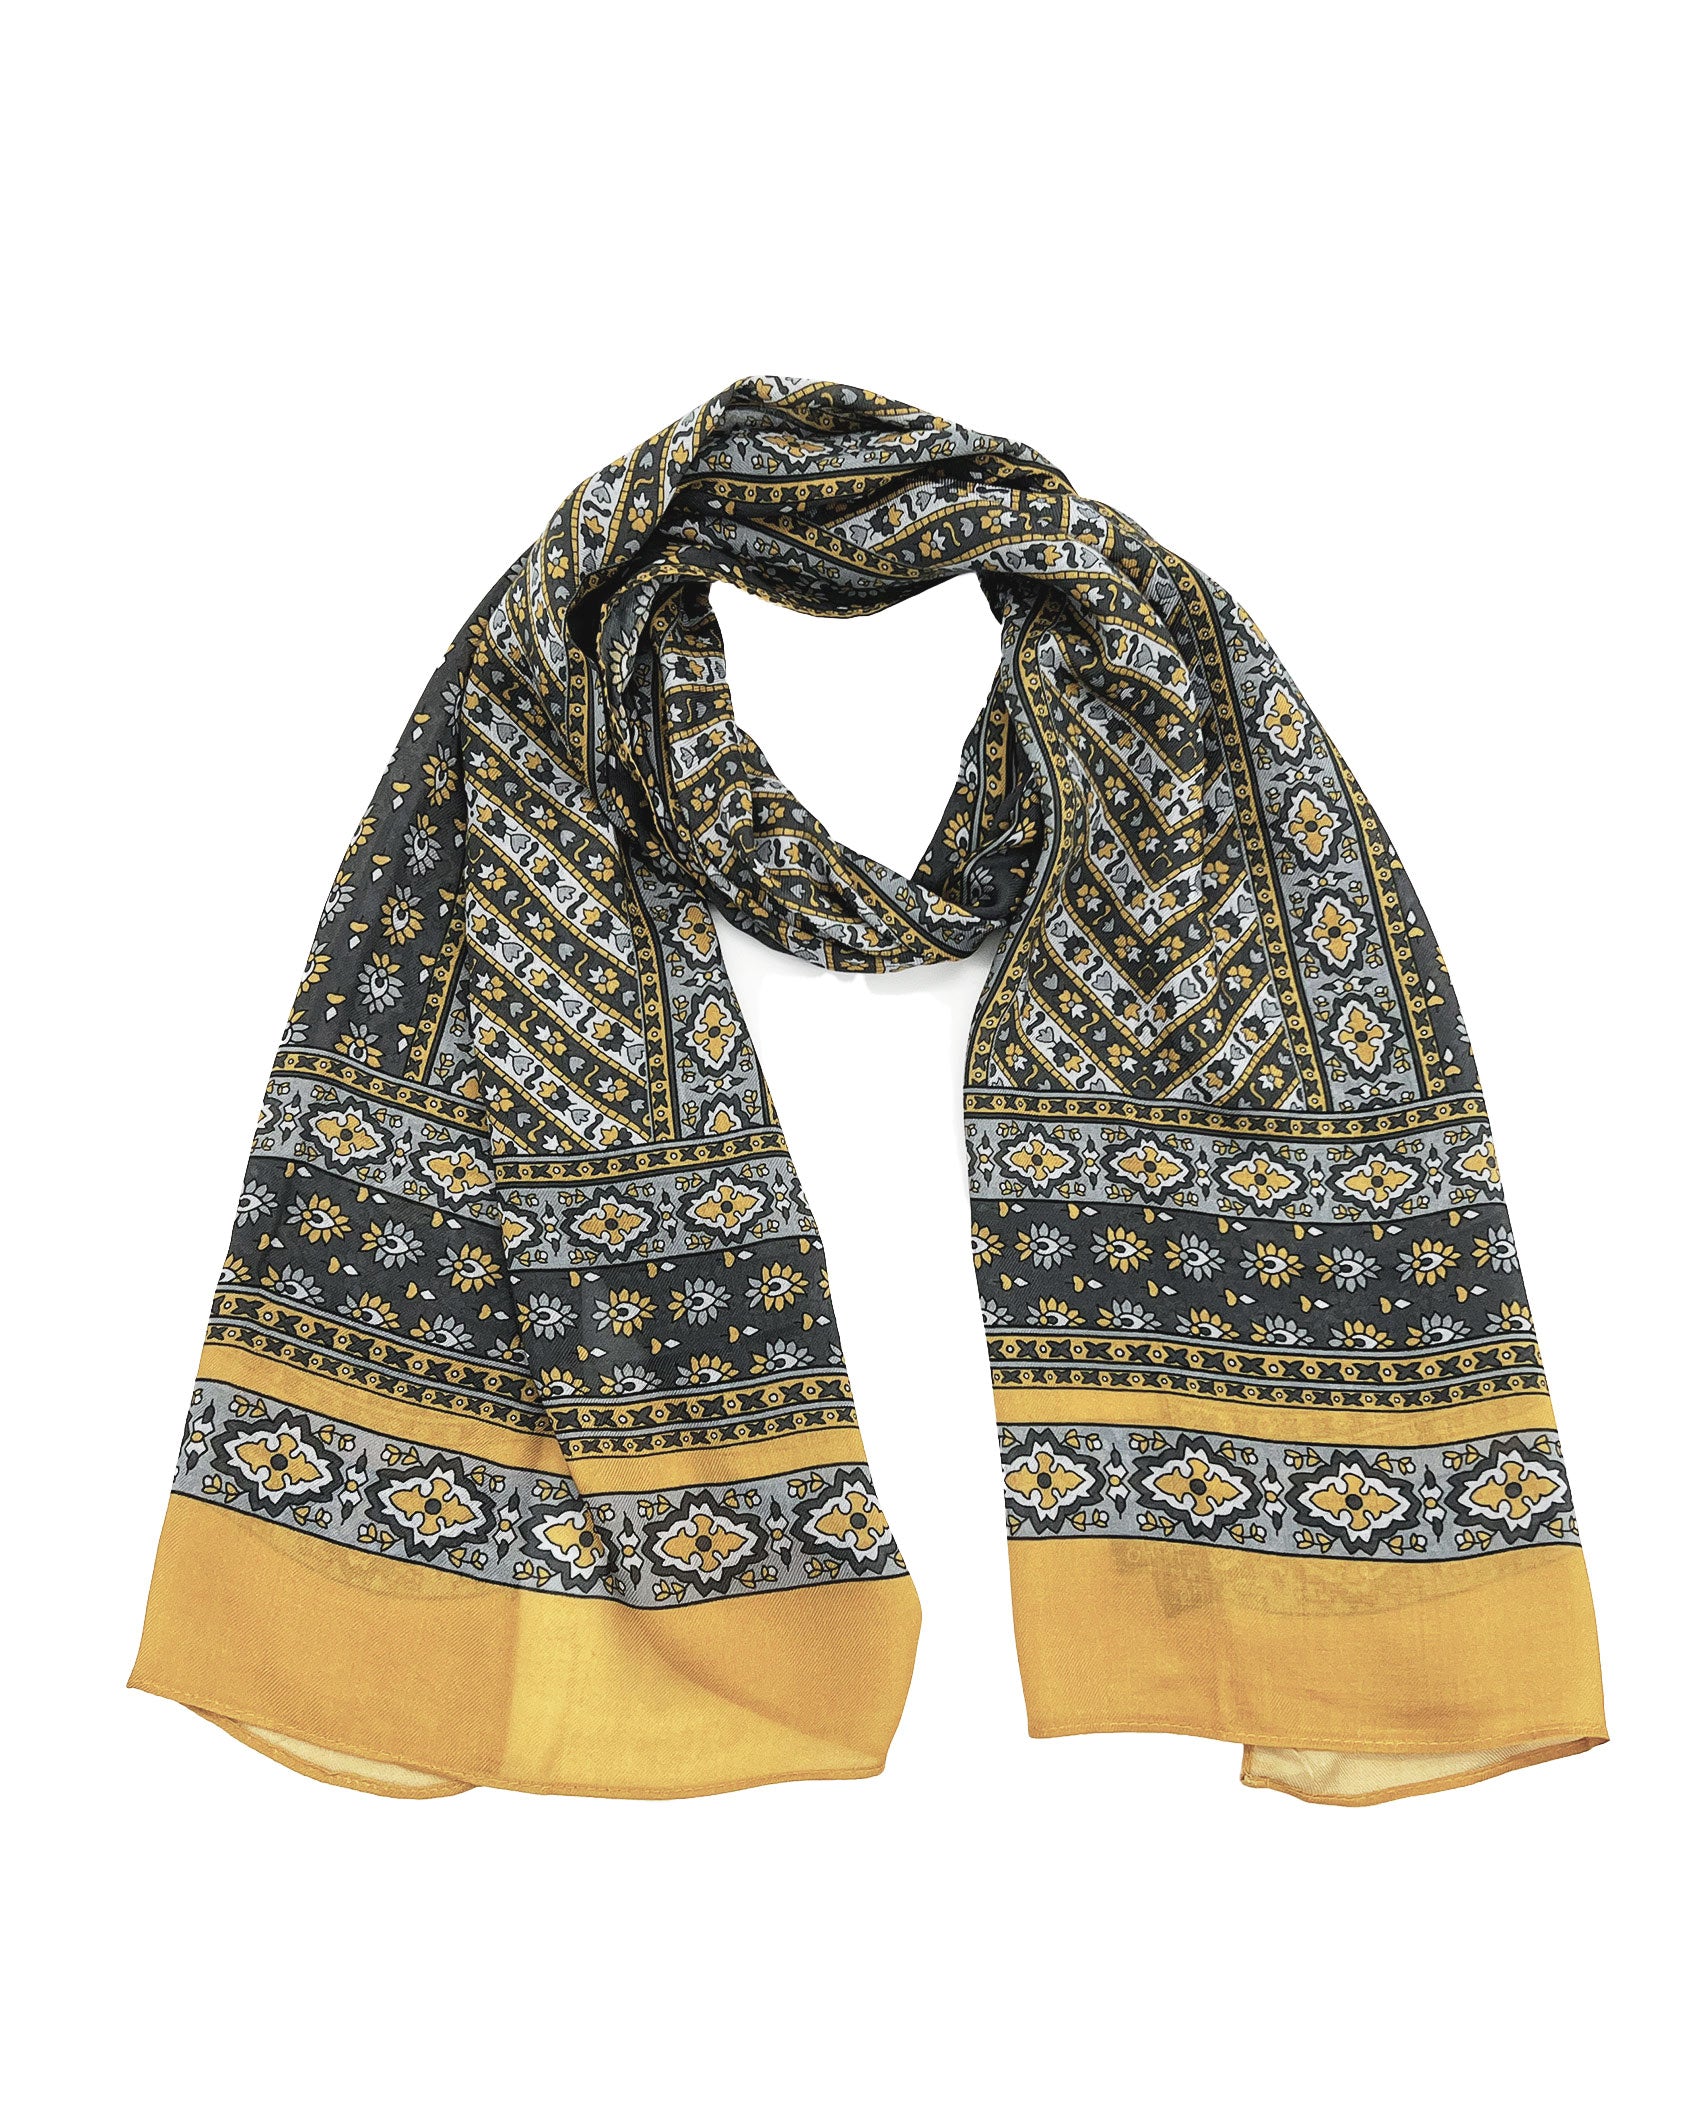 The Whitehorse wide scarf unravelled and looped in the middle, demonstrating the considerable length and showing the floral-inspired patterns in yellow, grey and silver.